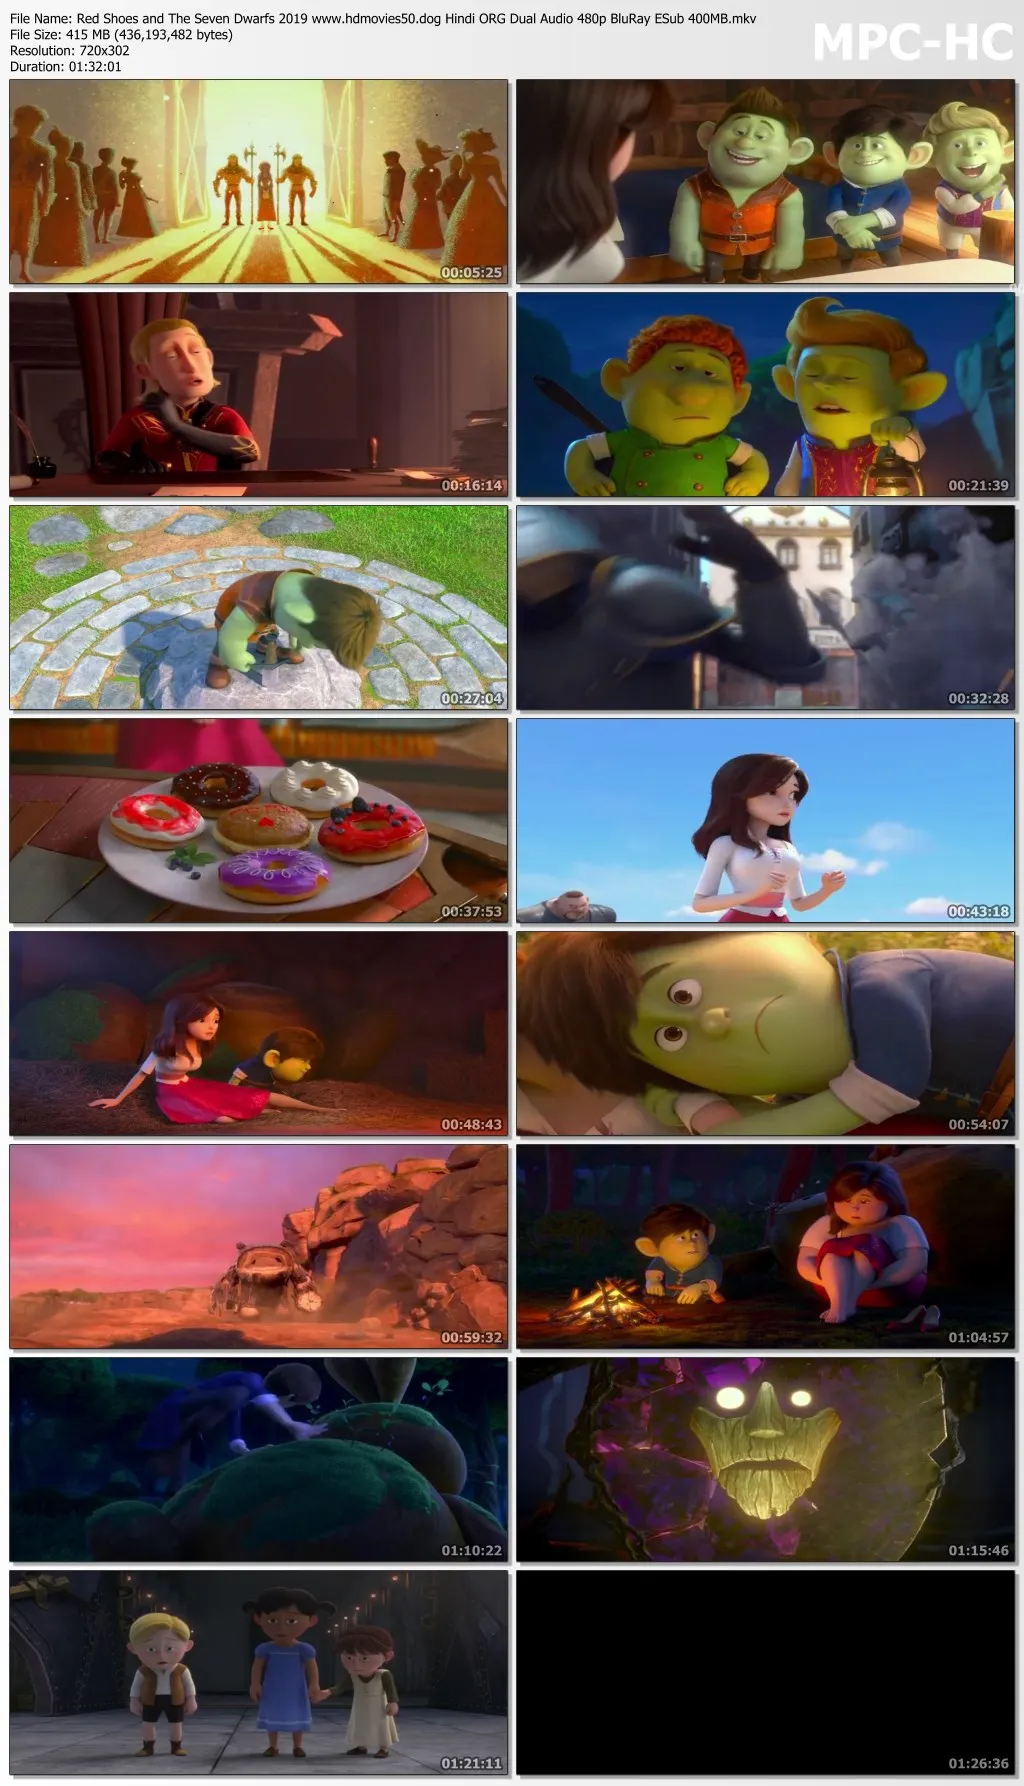 Red Shoes and The Seven Dwarfs 2019 Hindi ORG Dual Audio 480p BluRay ESub 400MB